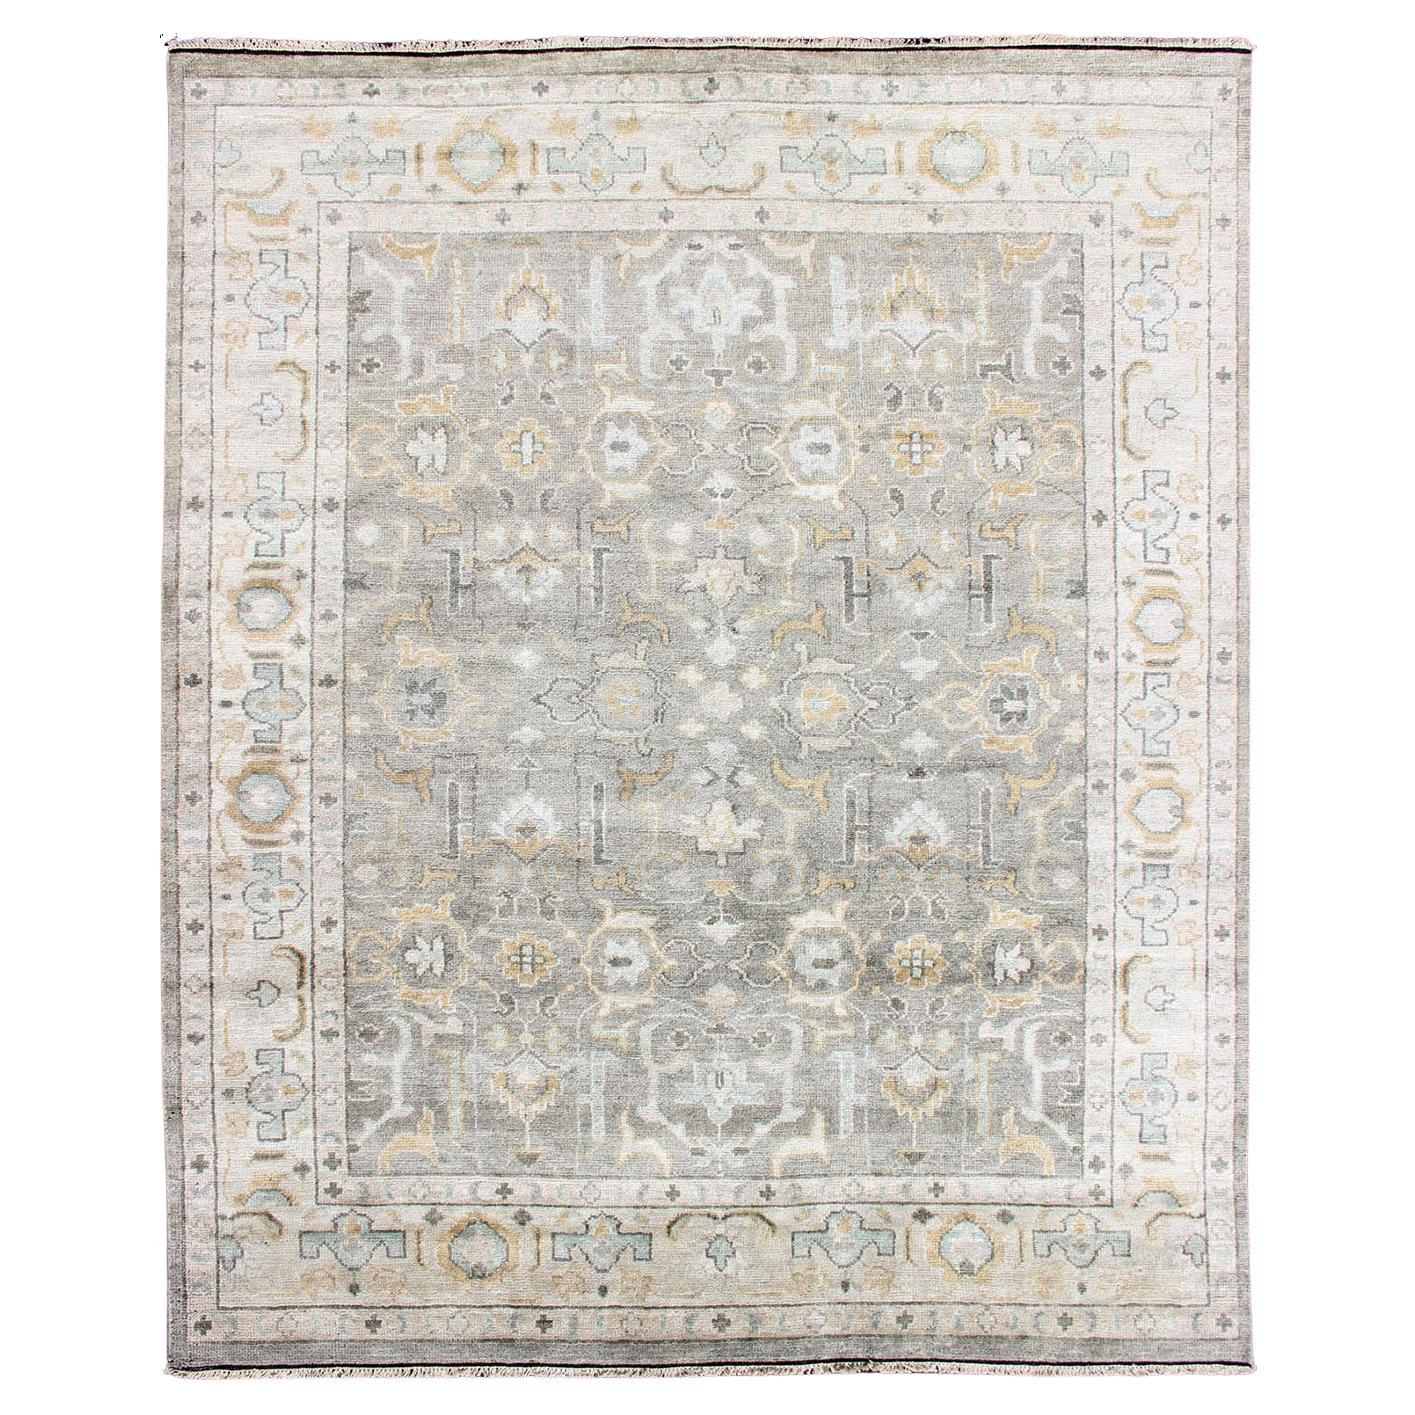 Hand-Knotted Indian Oushak in Faded Green, Taupe, Gold and Cream